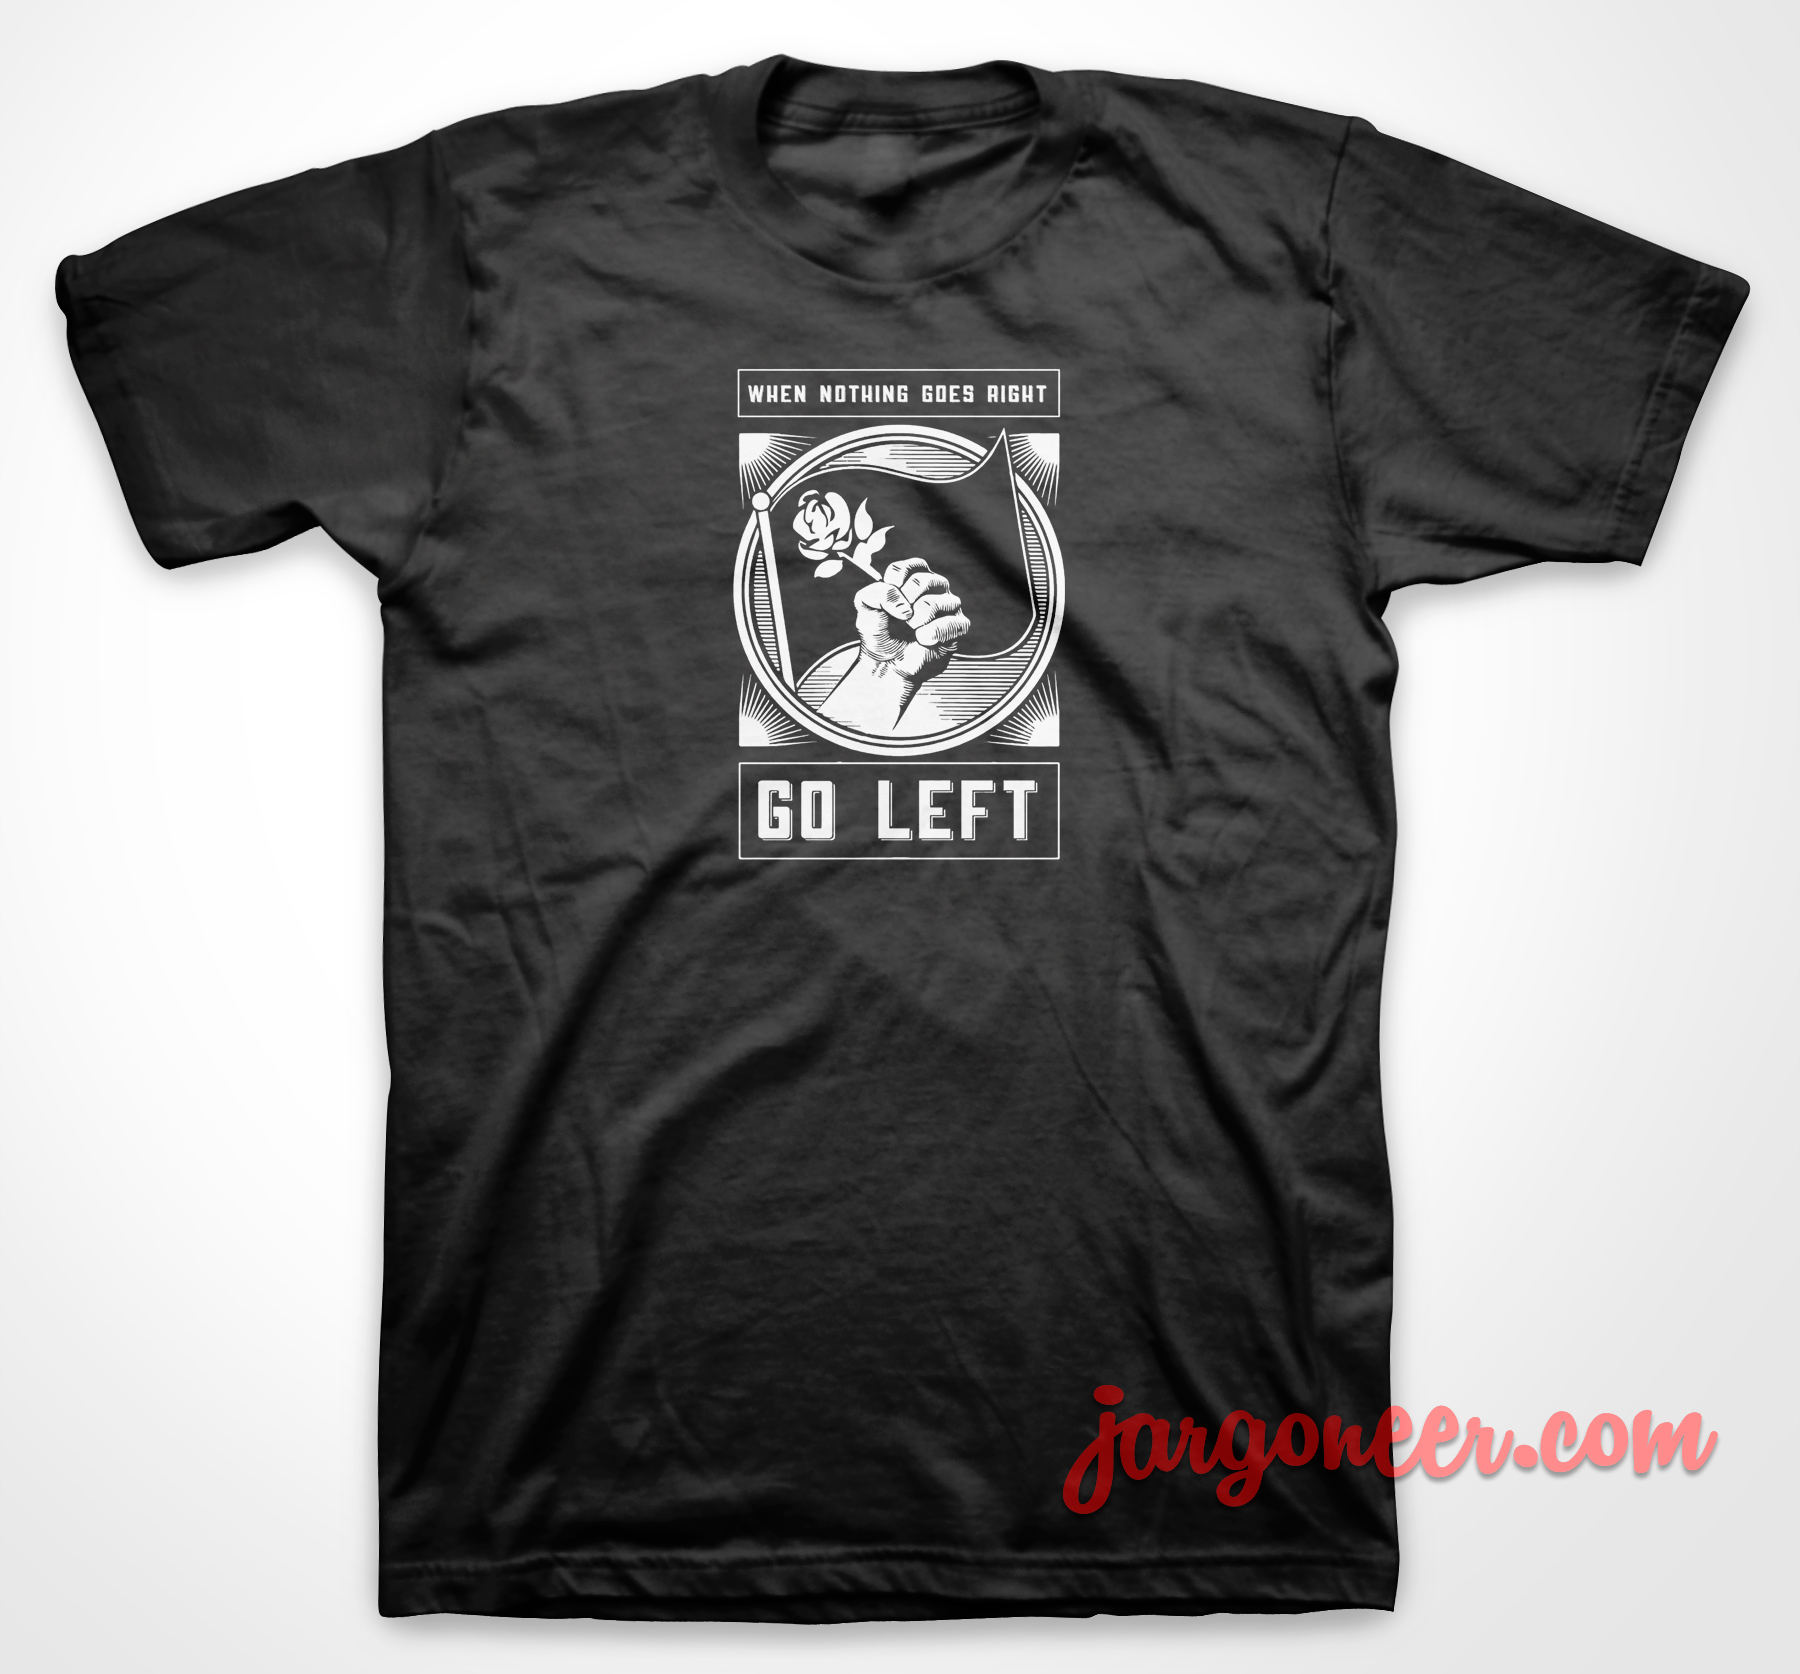 When Nothing Goes Right Go Left - Shop Unique Graphic Cool Shirt Designs